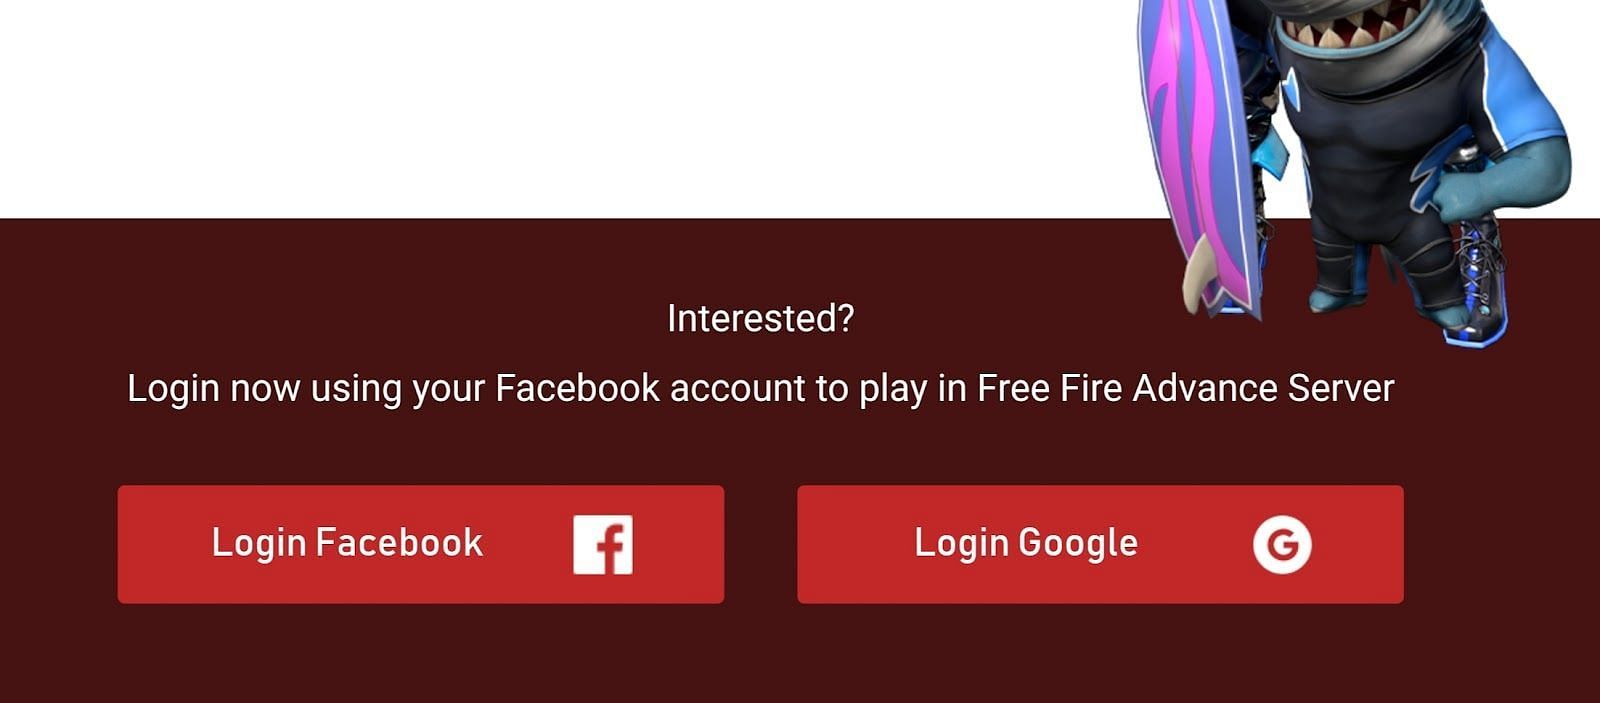 Log in using Google or Facebook account linked to the player ID (Image via Garena)